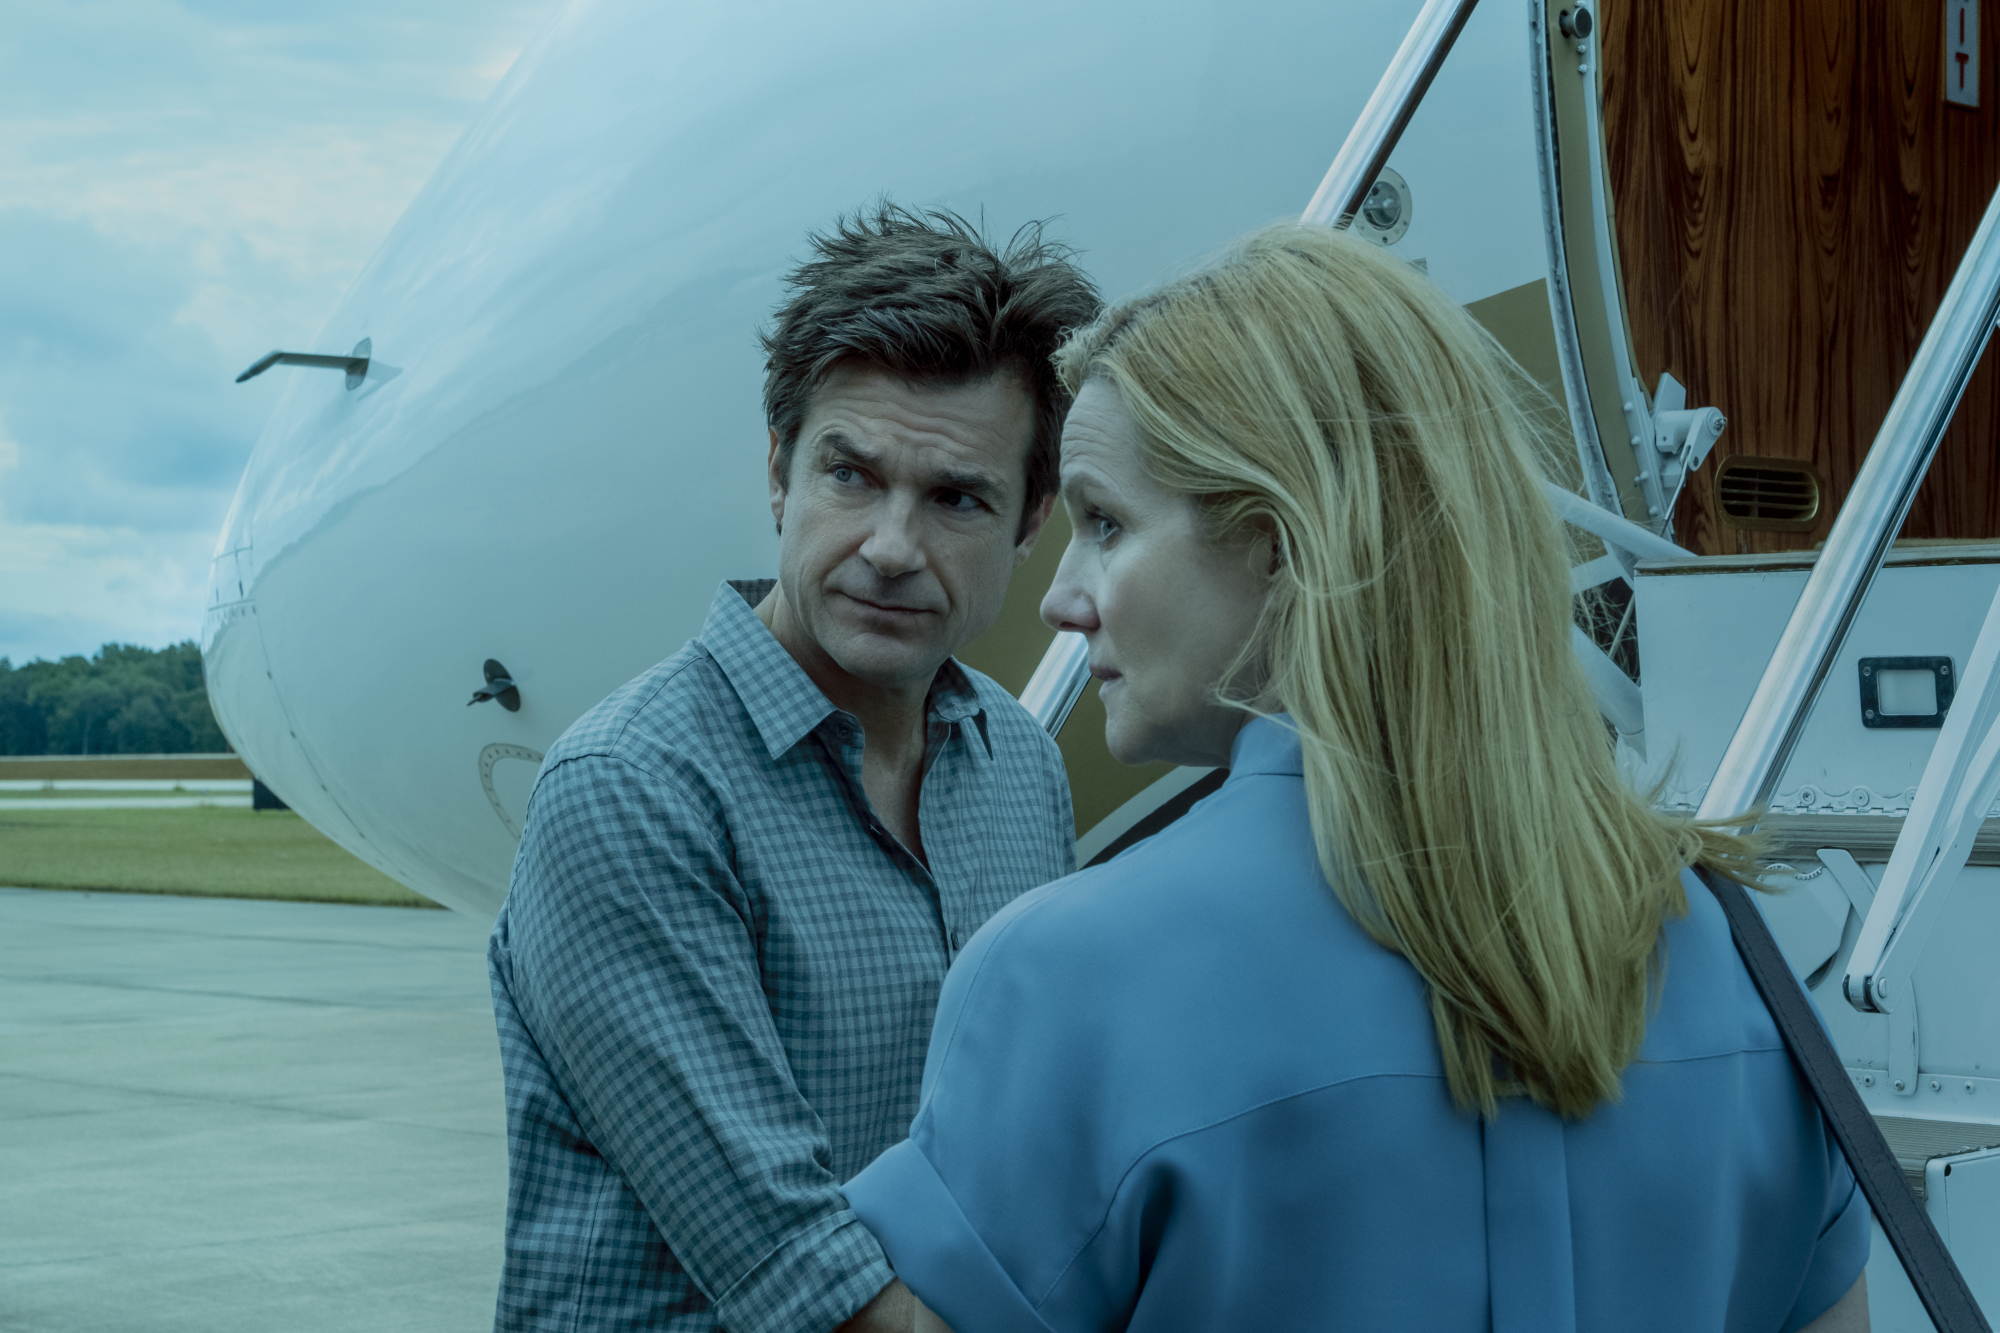 Jason Bateman and Laura Linney as Marty and Wendy Byrde in 'Ozark' Season 3. They're boarding a plan and looking back at something.